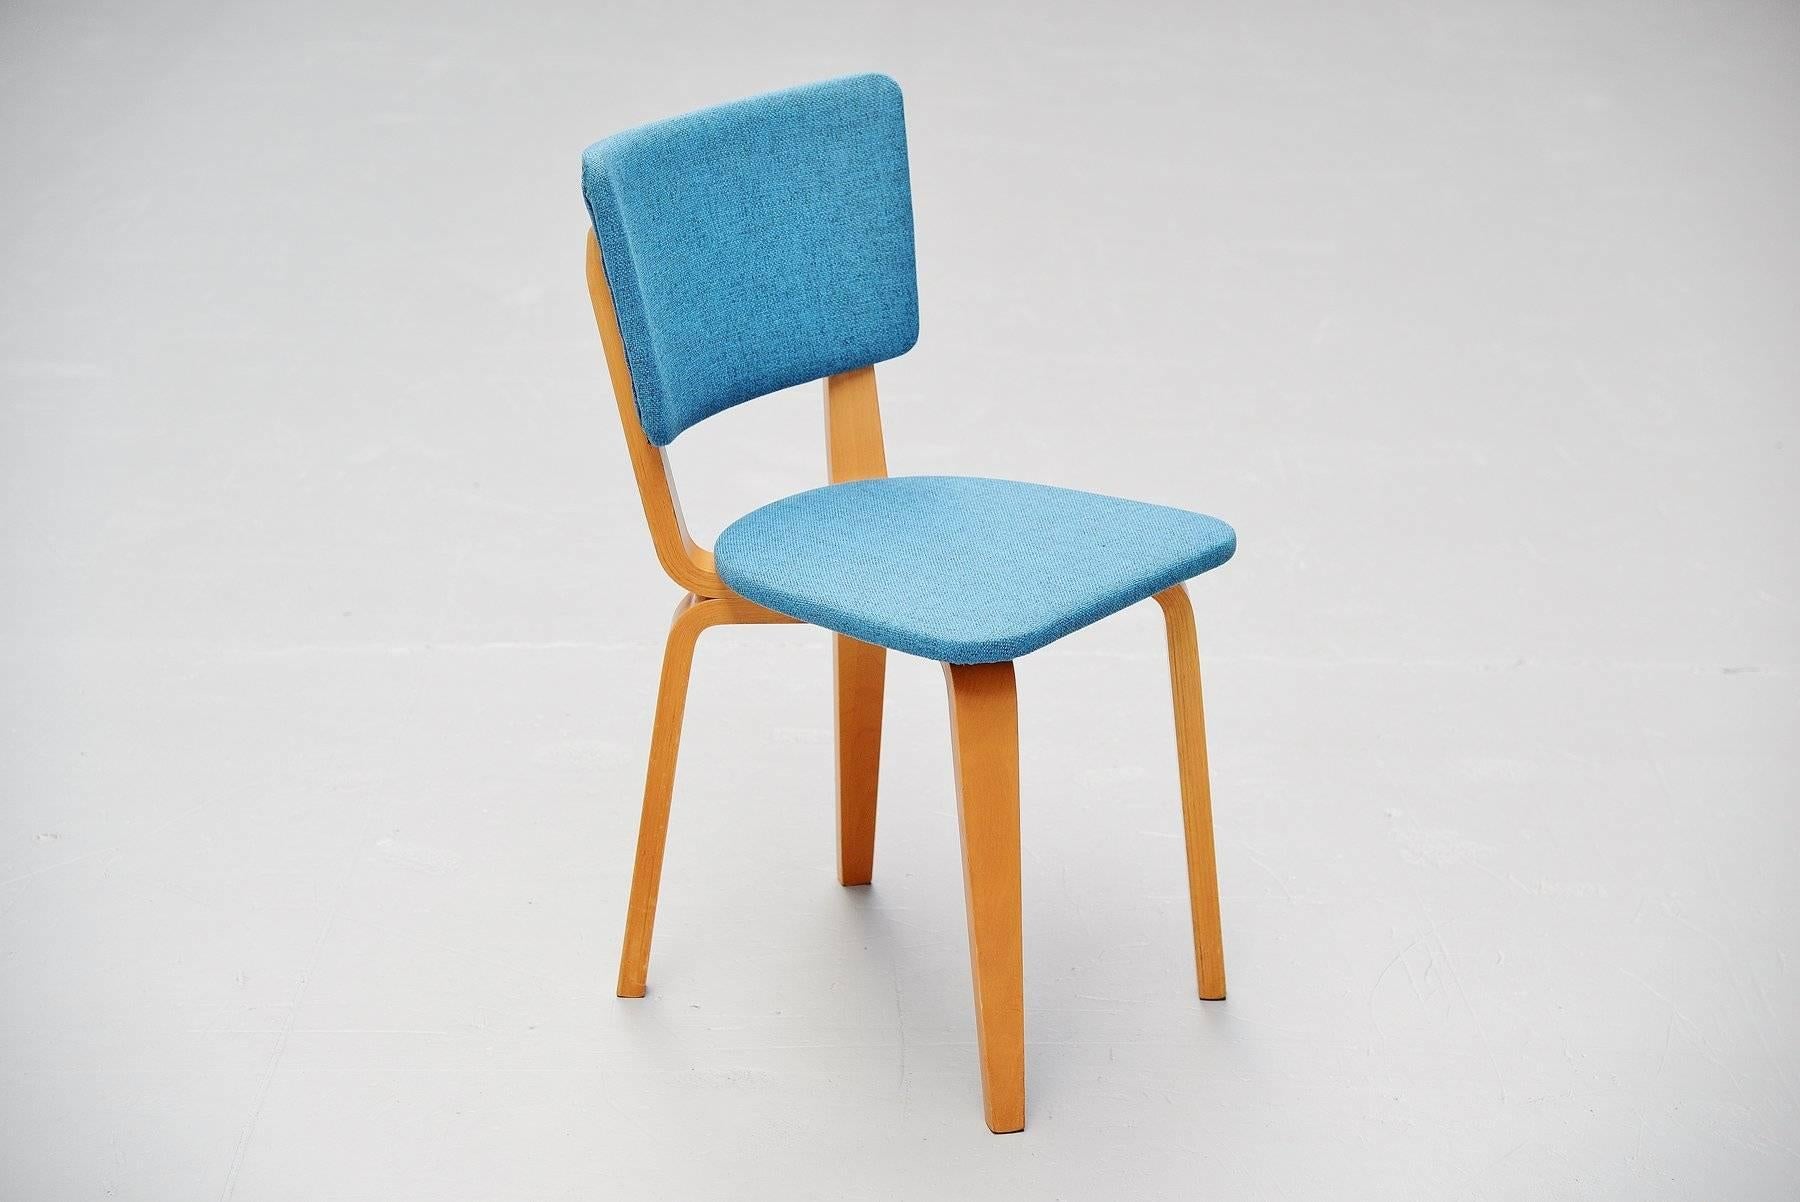 Birch Cor Alons Plywood Dining Chairs Gouda Den Boer, 1949